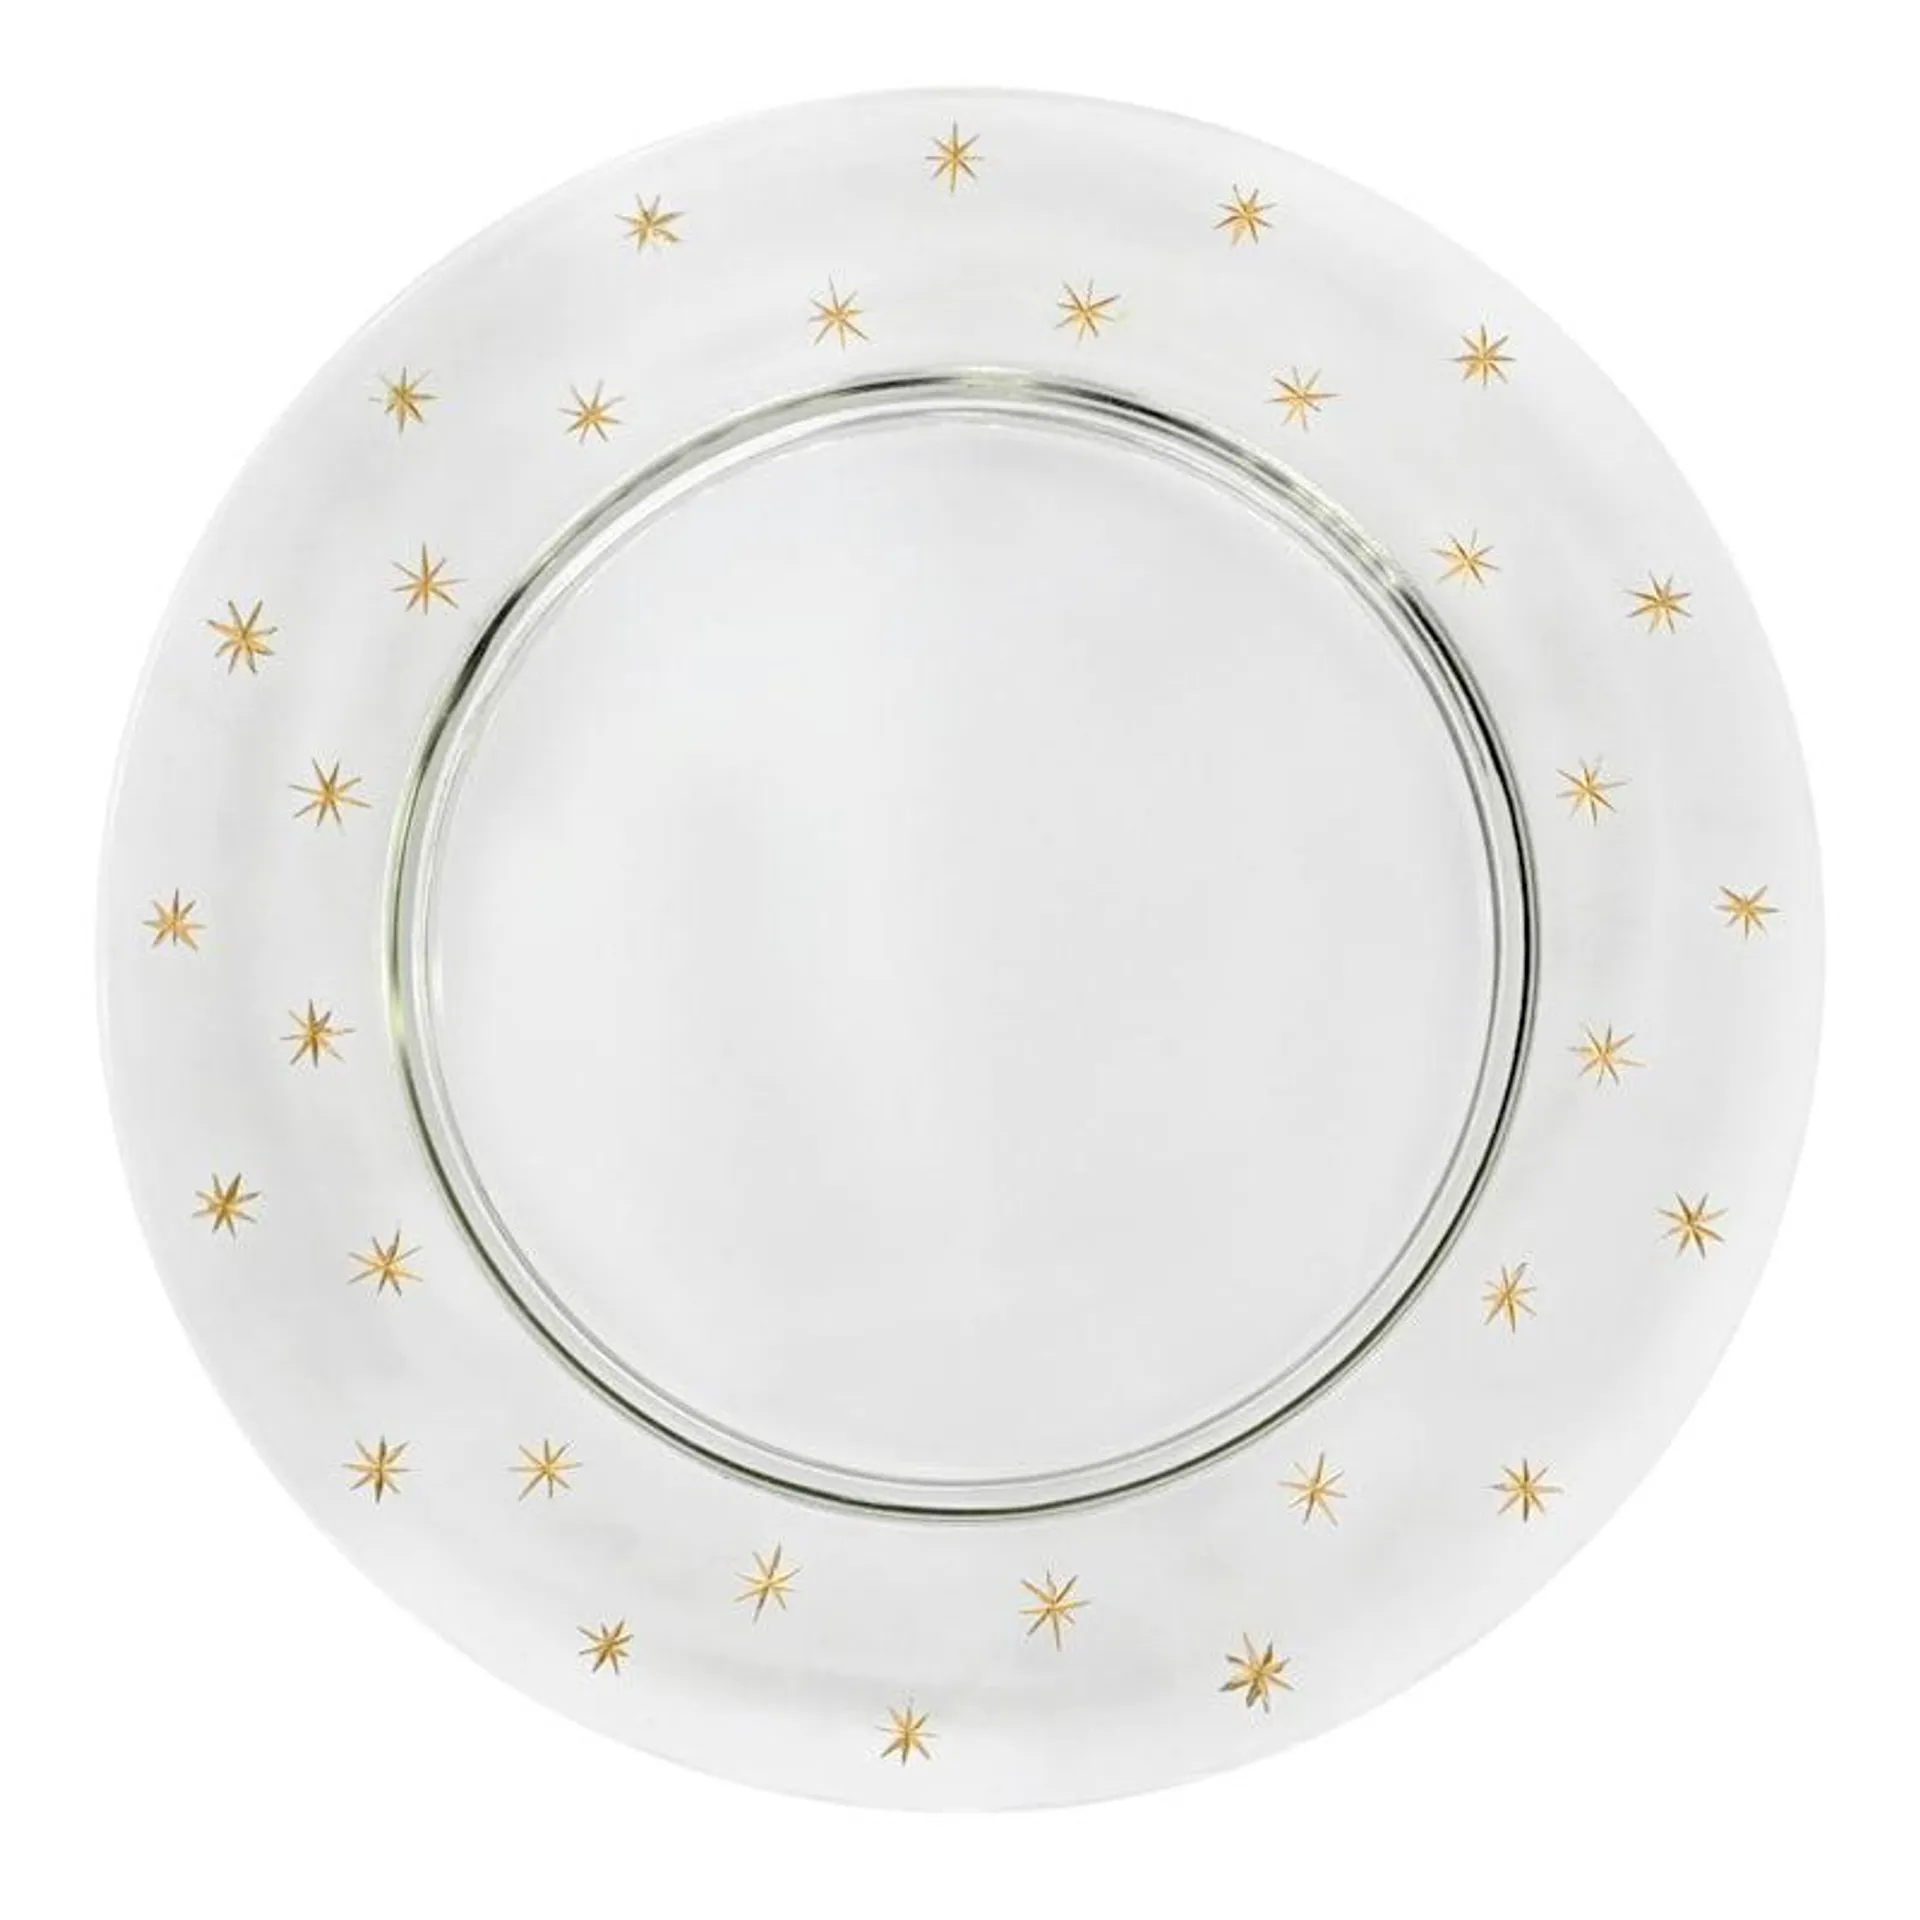 Gold Star Design Glass Charger Plate